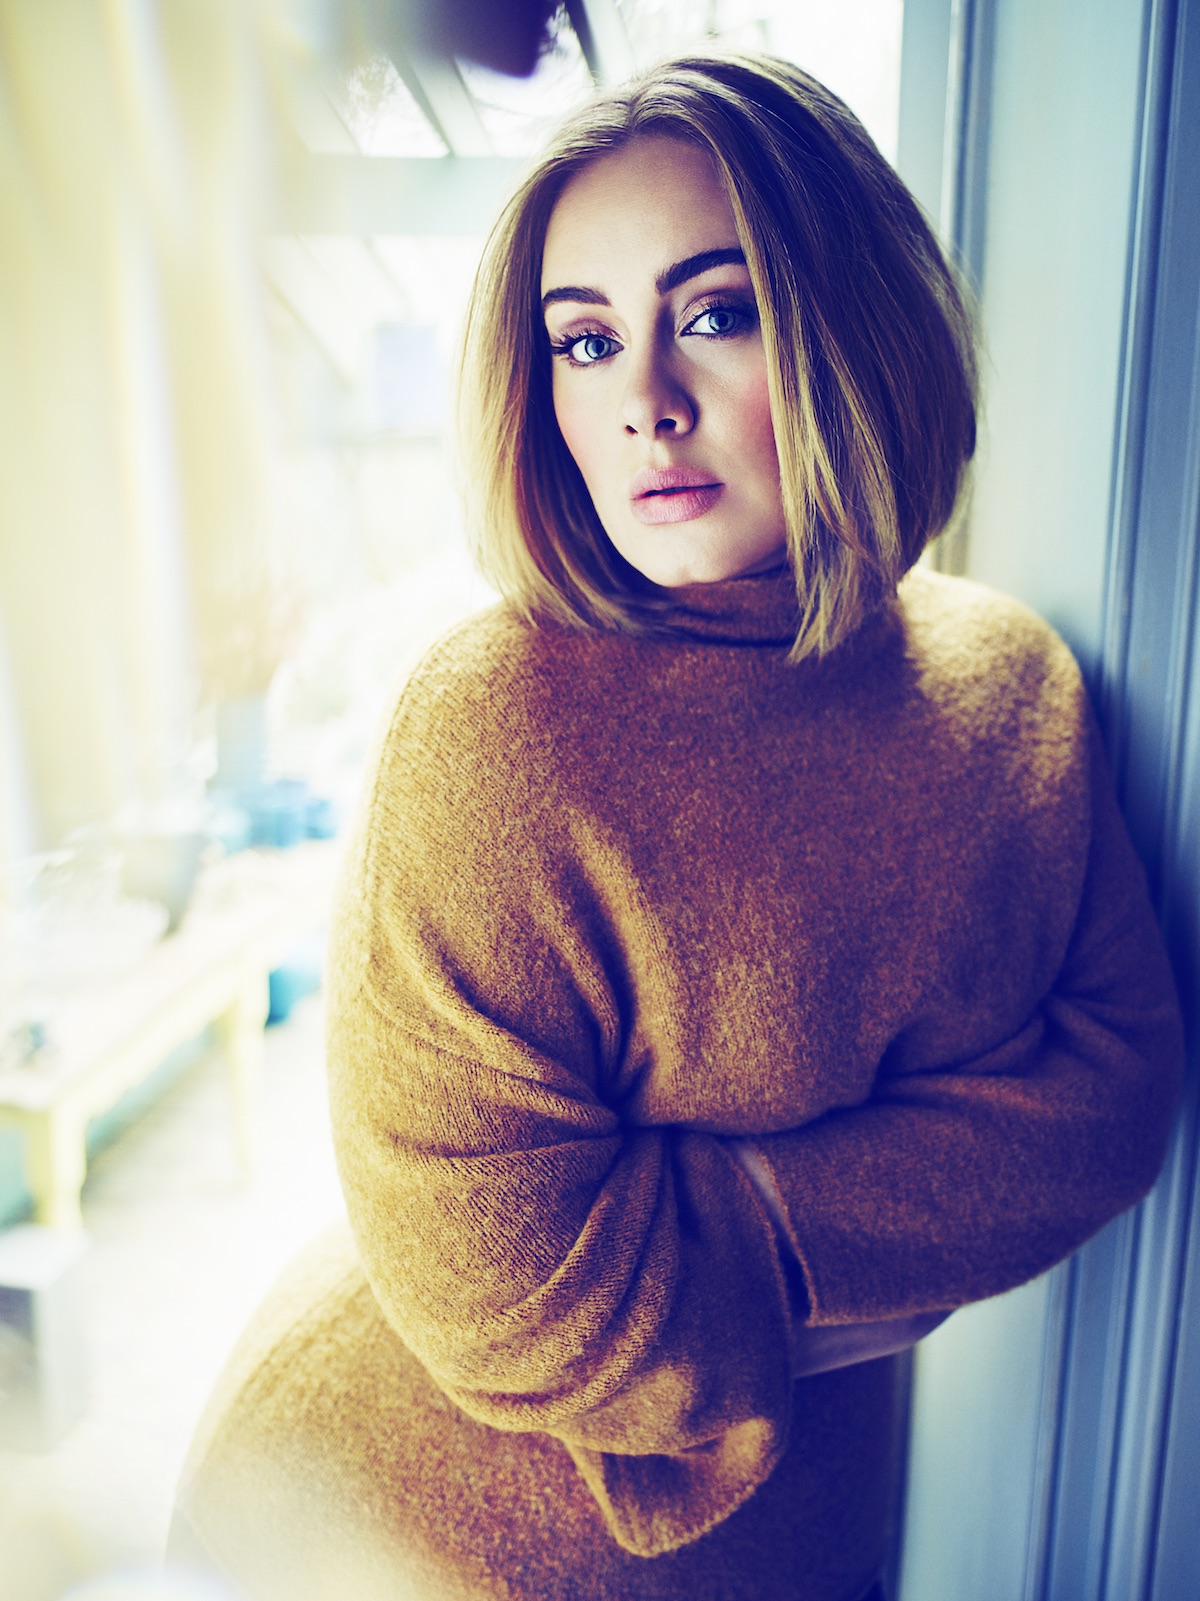 Adele Is Coming To Australia In February 2017 - Noise11.com